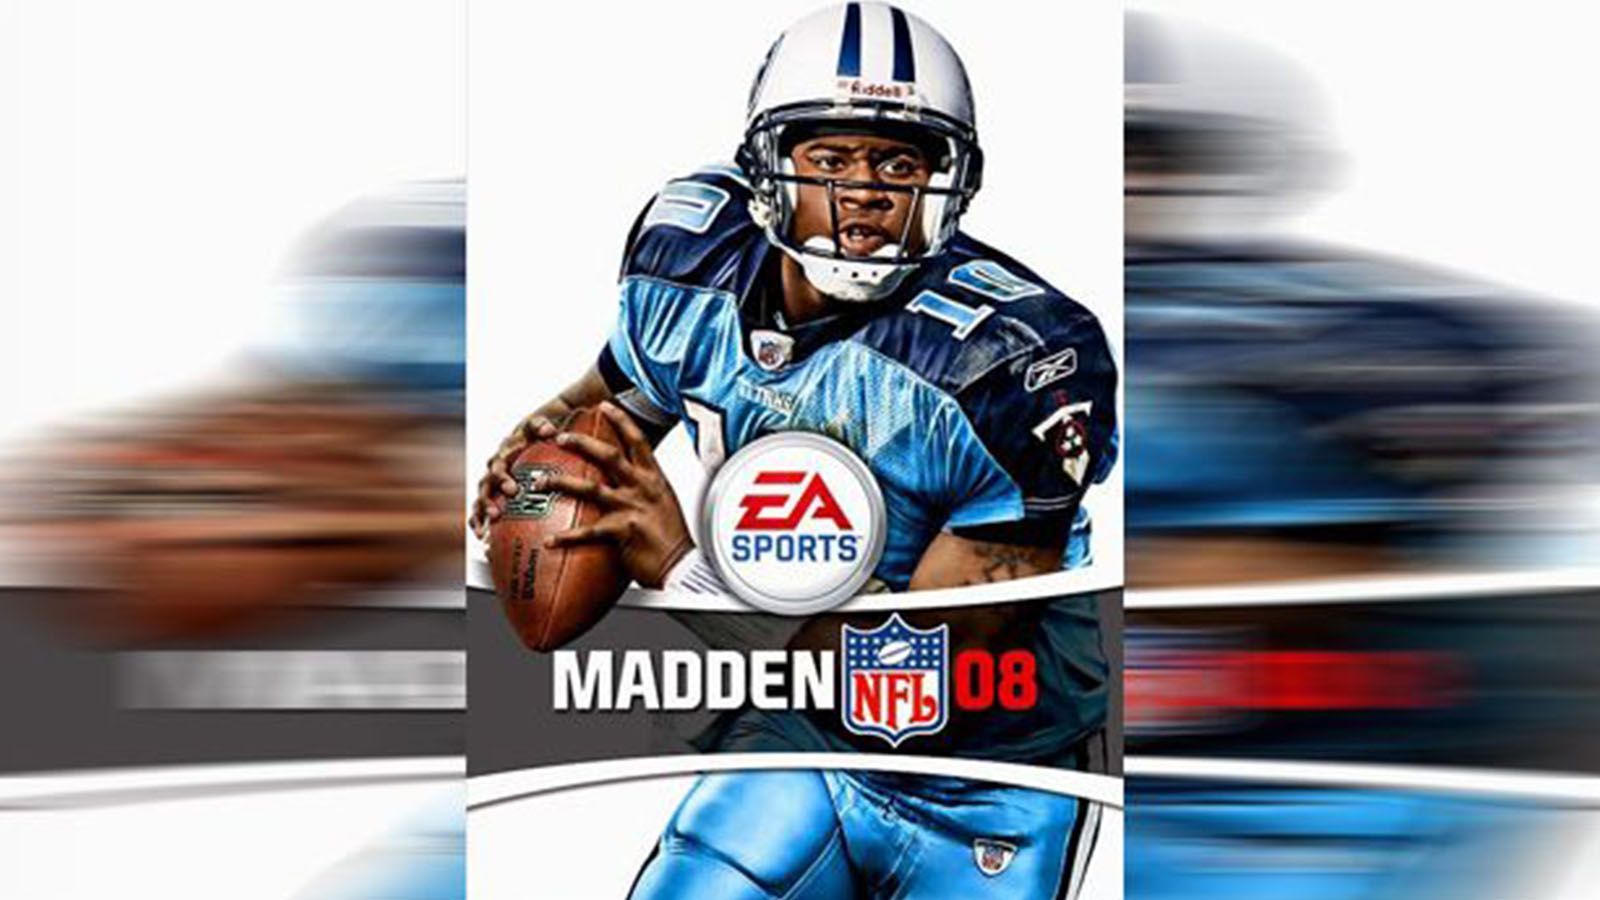 
                <strong>Madden NFL 08</strong><br>
                Madden NFL 08 - Cover-Spieler: Vince Young.
              